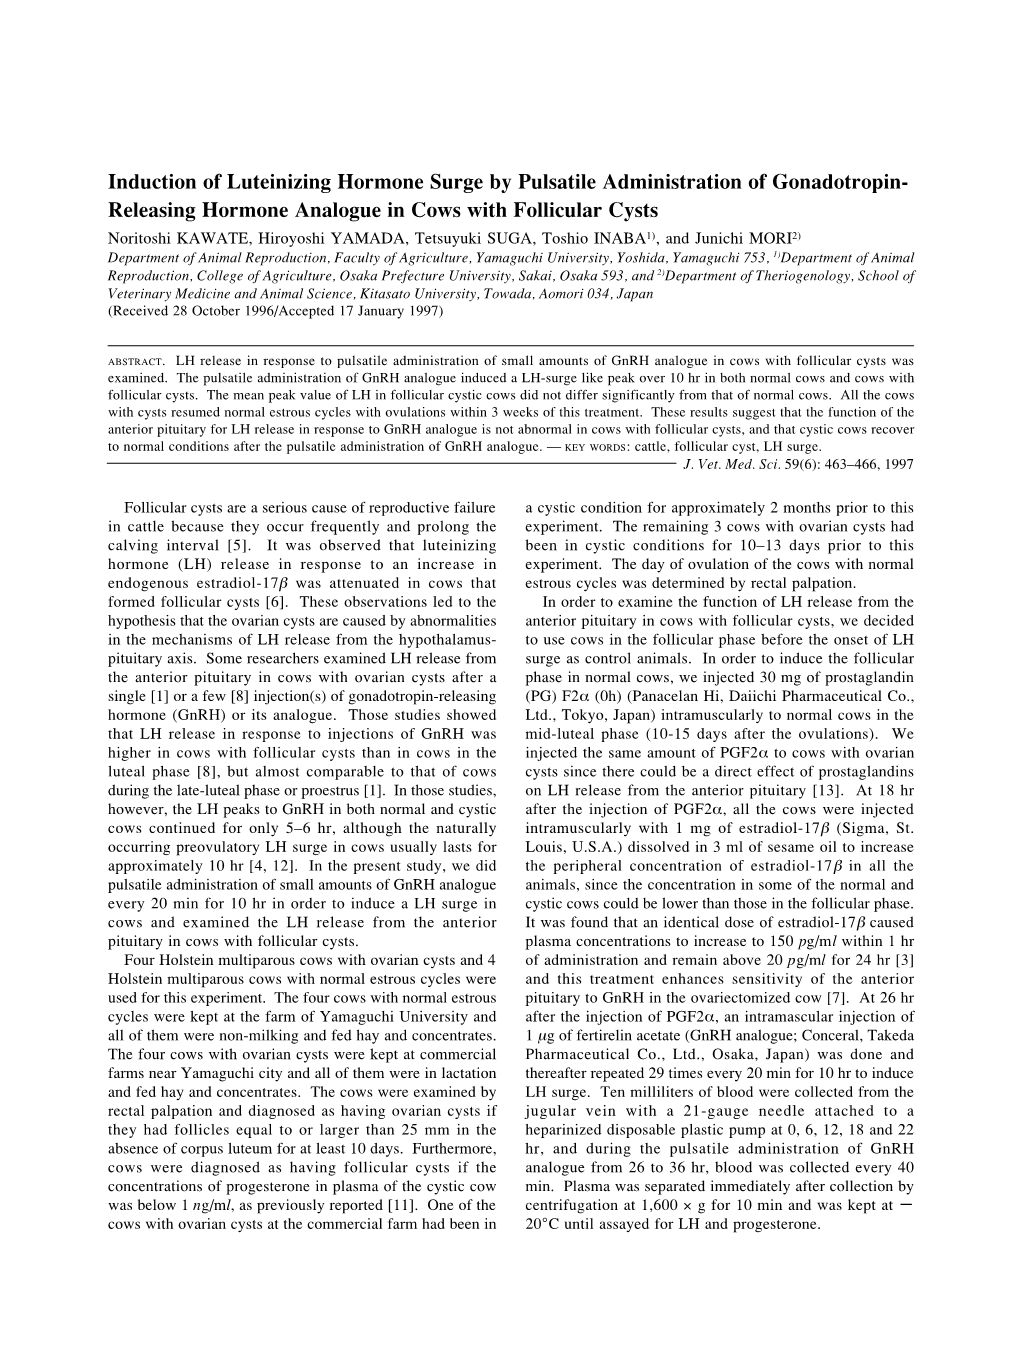 Induction of Luteinizing Hormone Surge by Pulsatile Administration of Gonadotropin